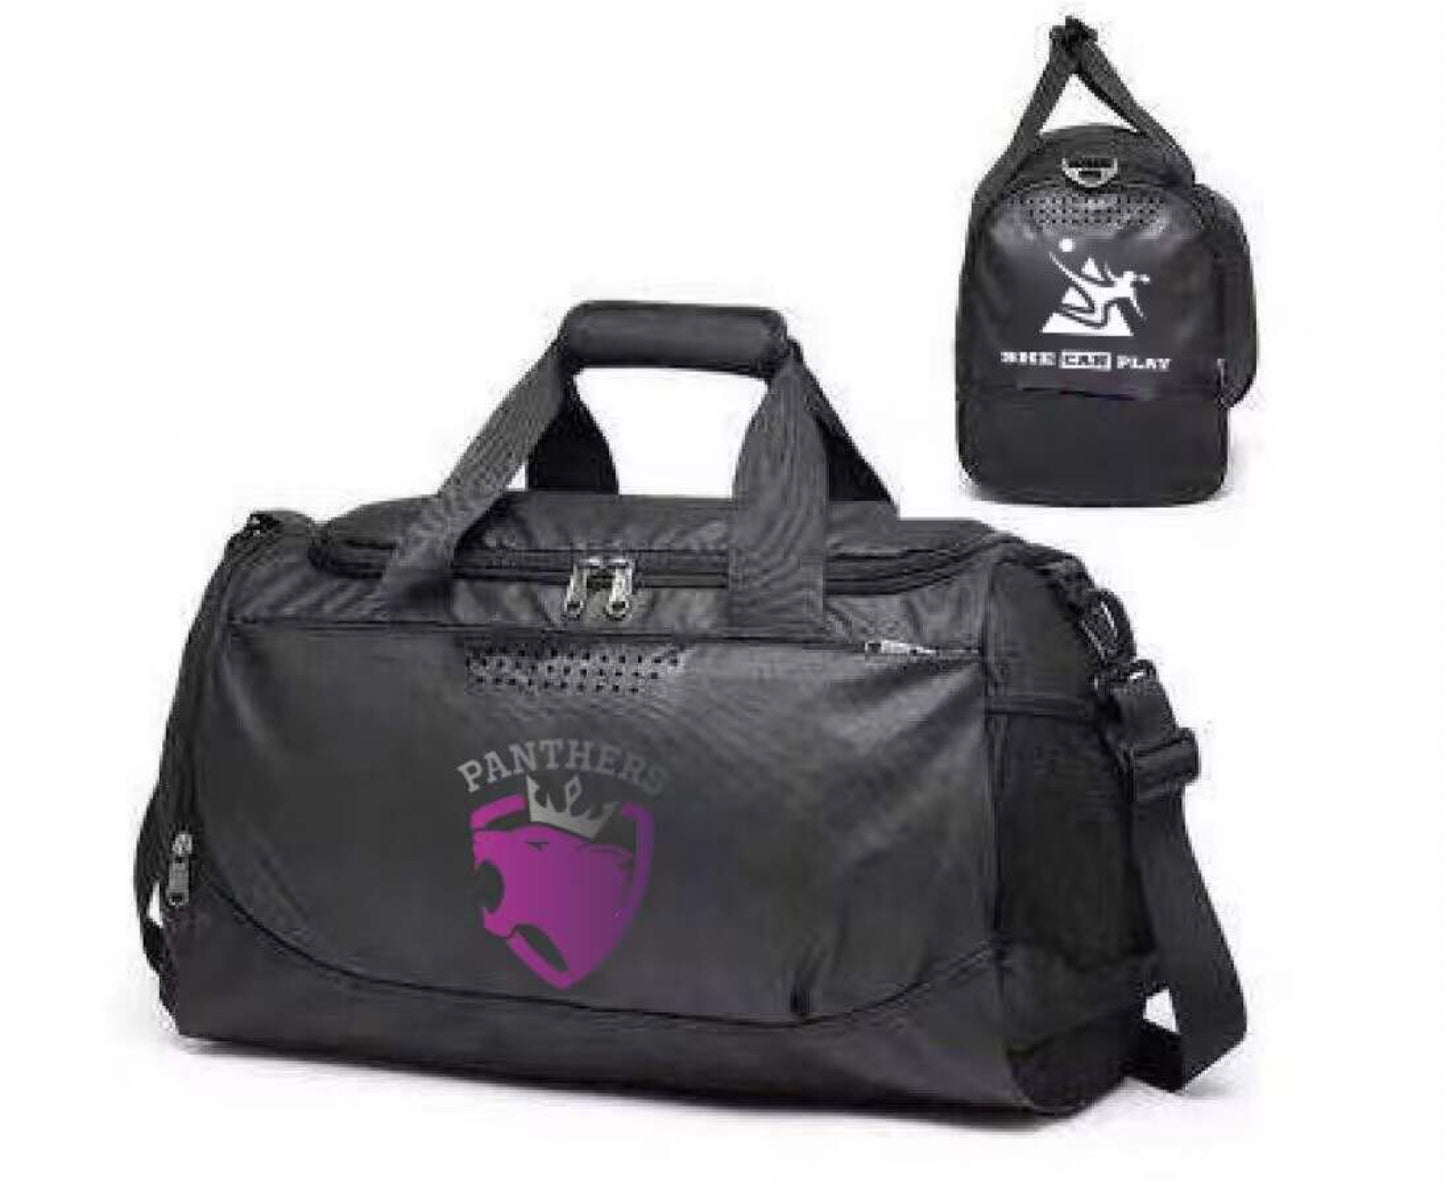 PANTHER SPORTS HOLDALL - SHE CAN PLAY